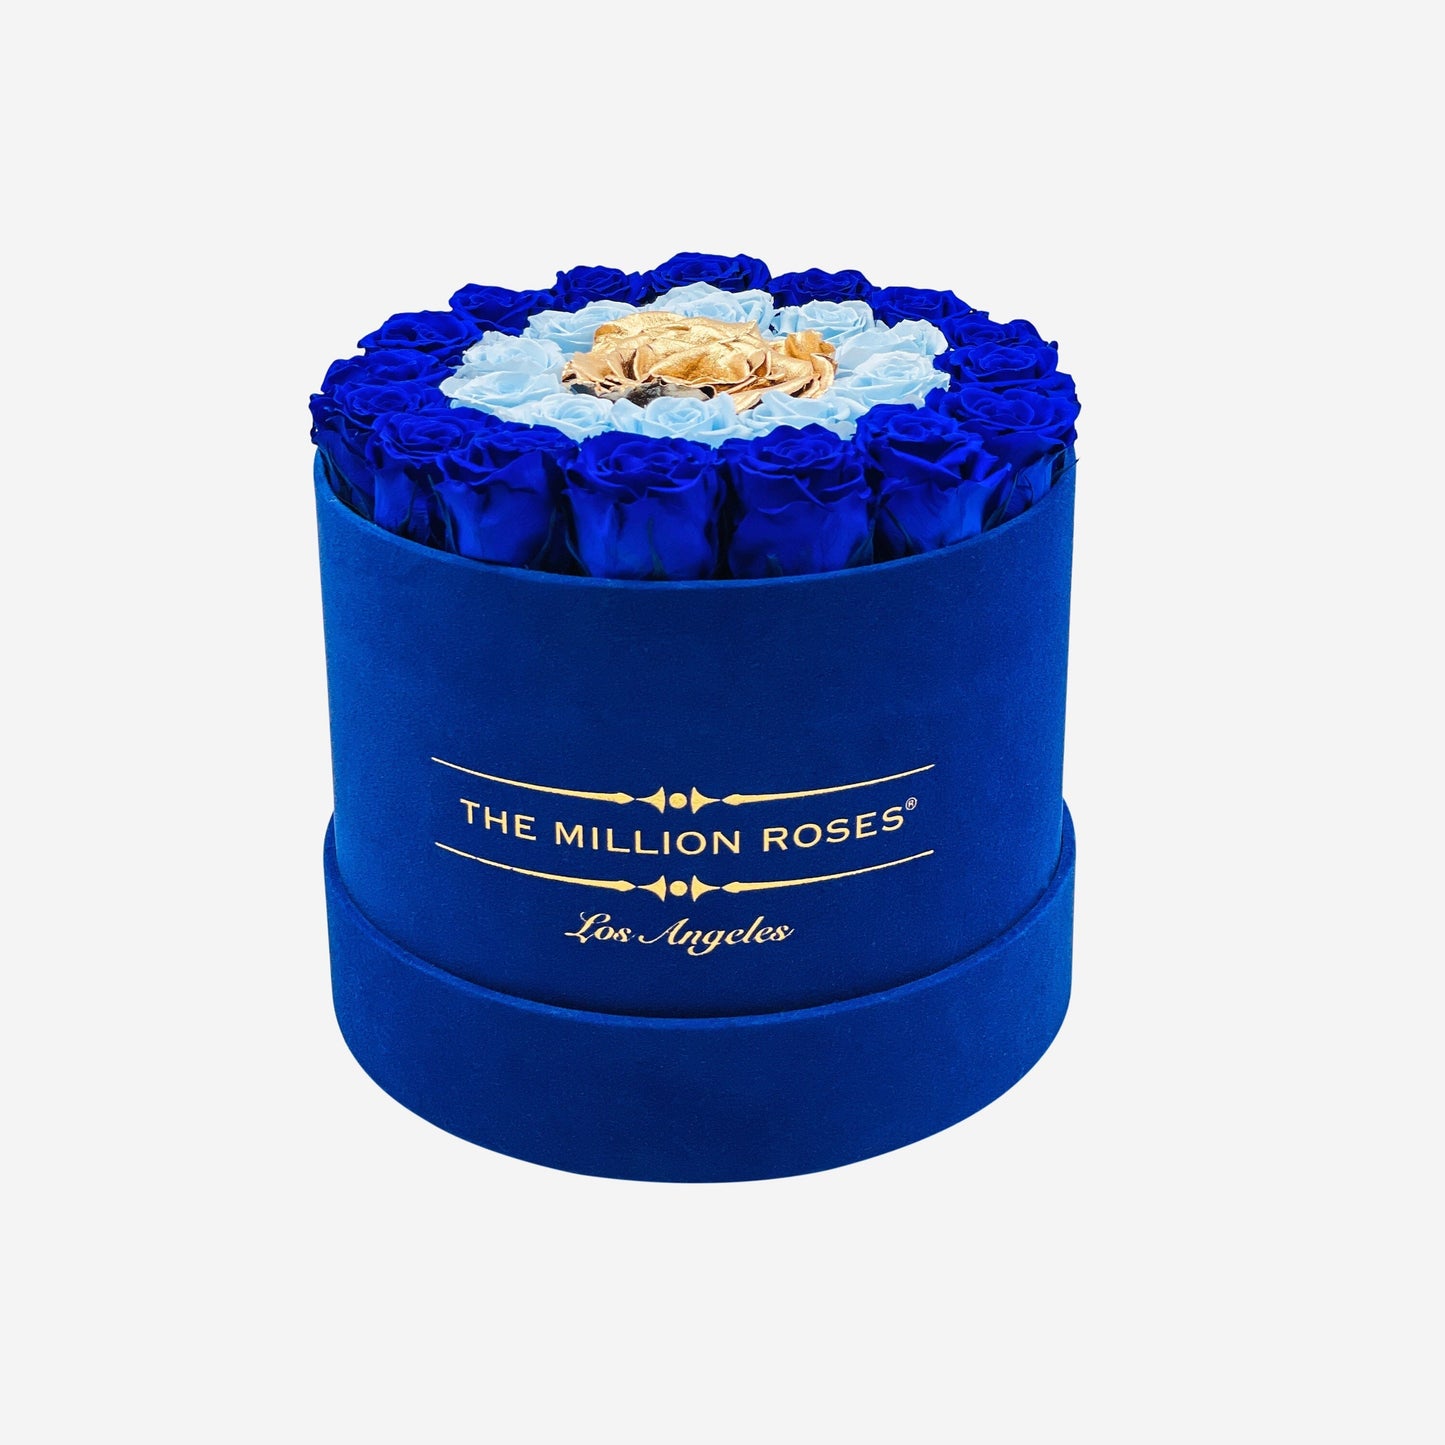 Classic Royal Blue Suede Box | Royal Blue & Light Blue Roses | Target - The Million Roses